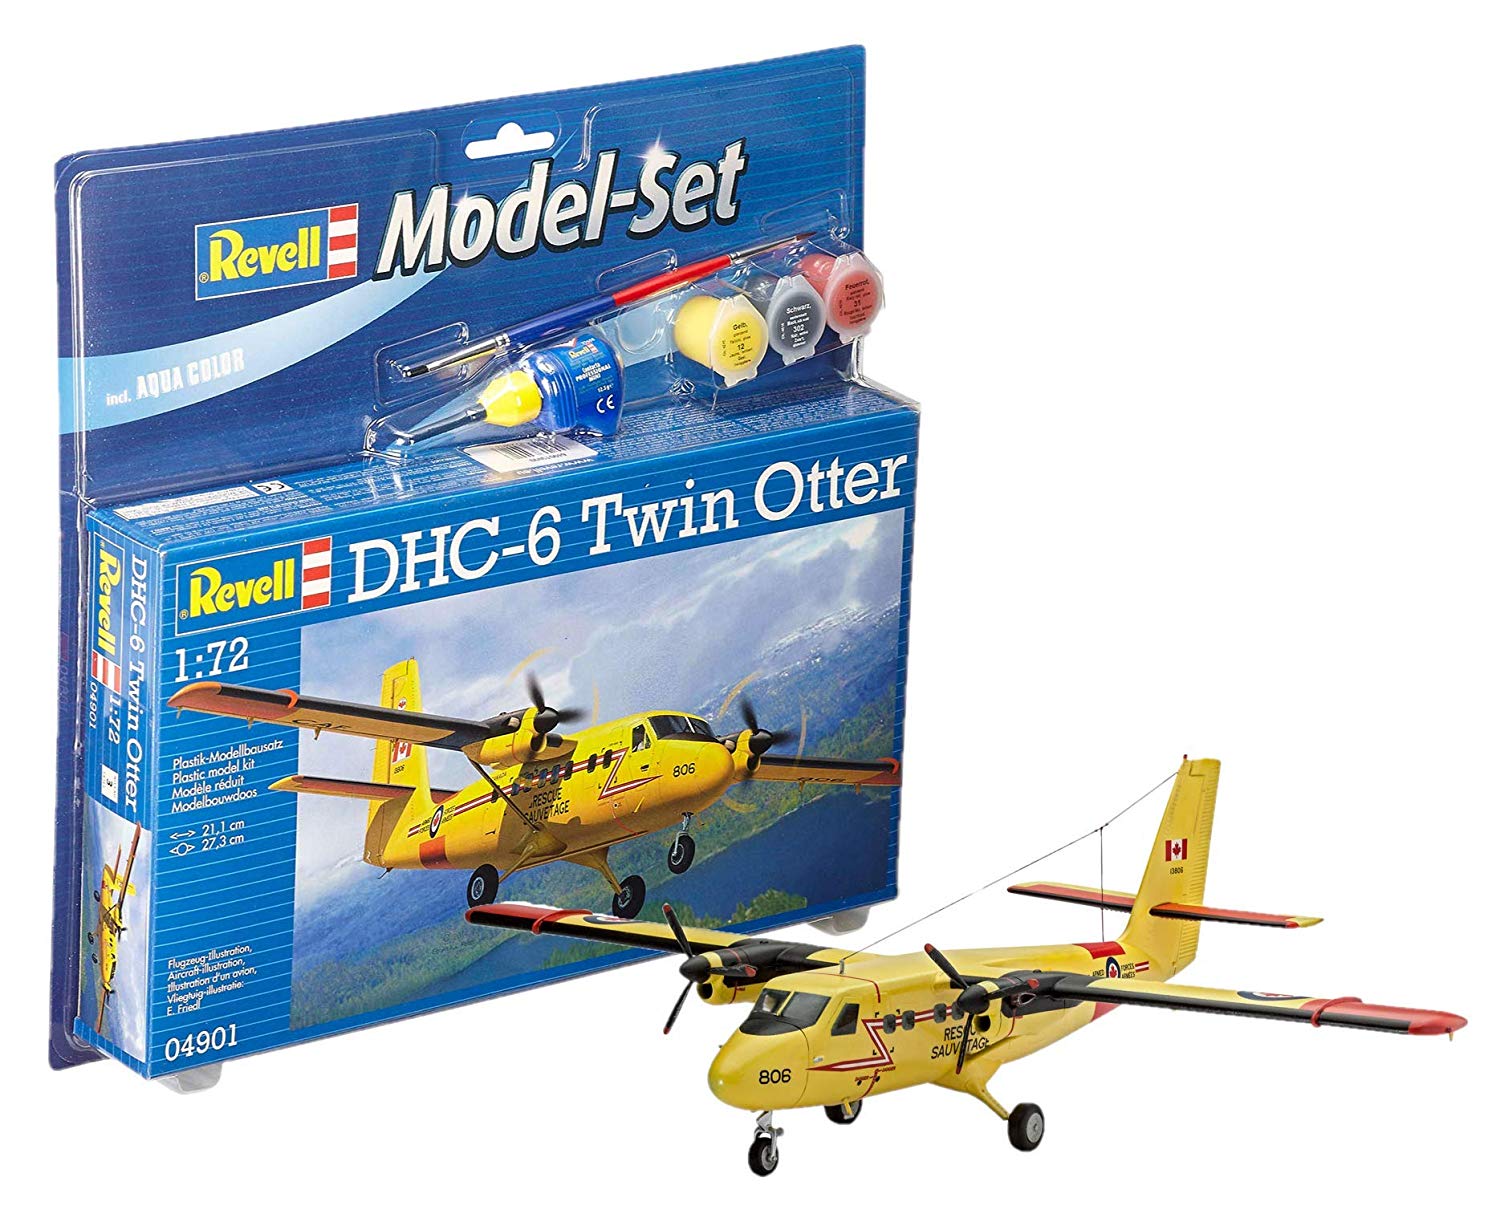 Revell Dhc Twin Otter